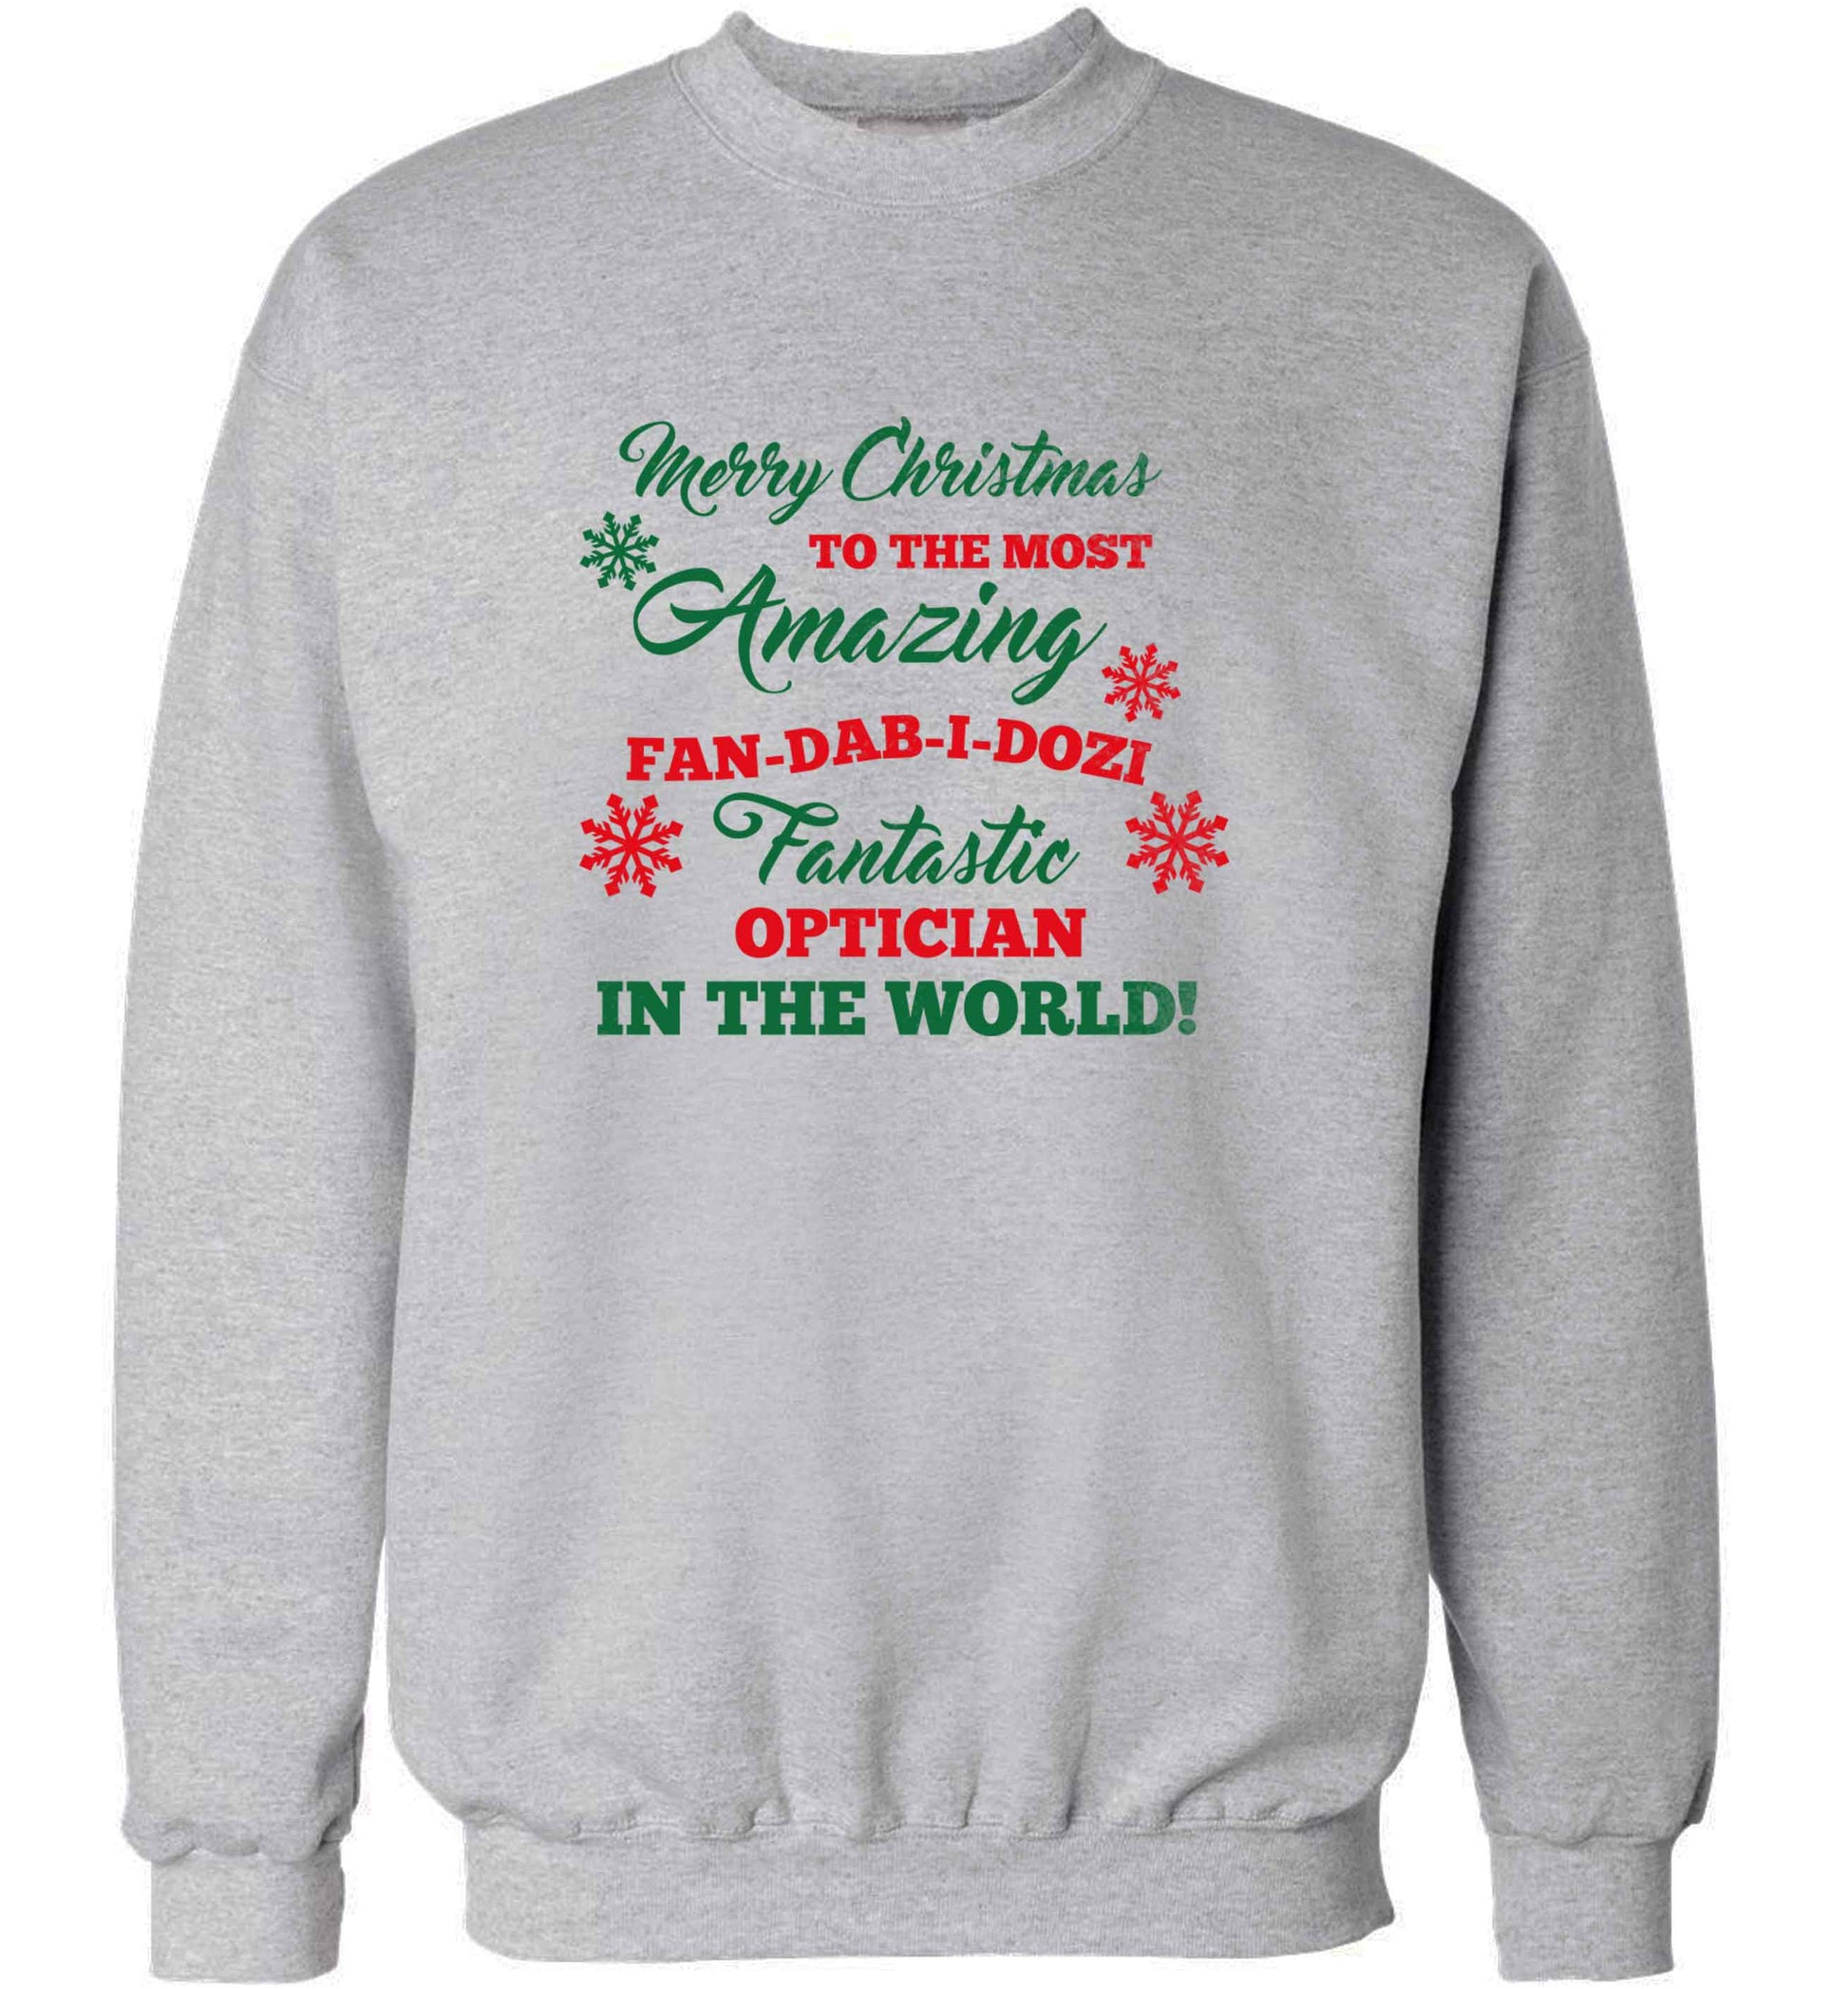 Merry Christmas to the most amazing optician in the world! adult's unisex grey sweater 2XL